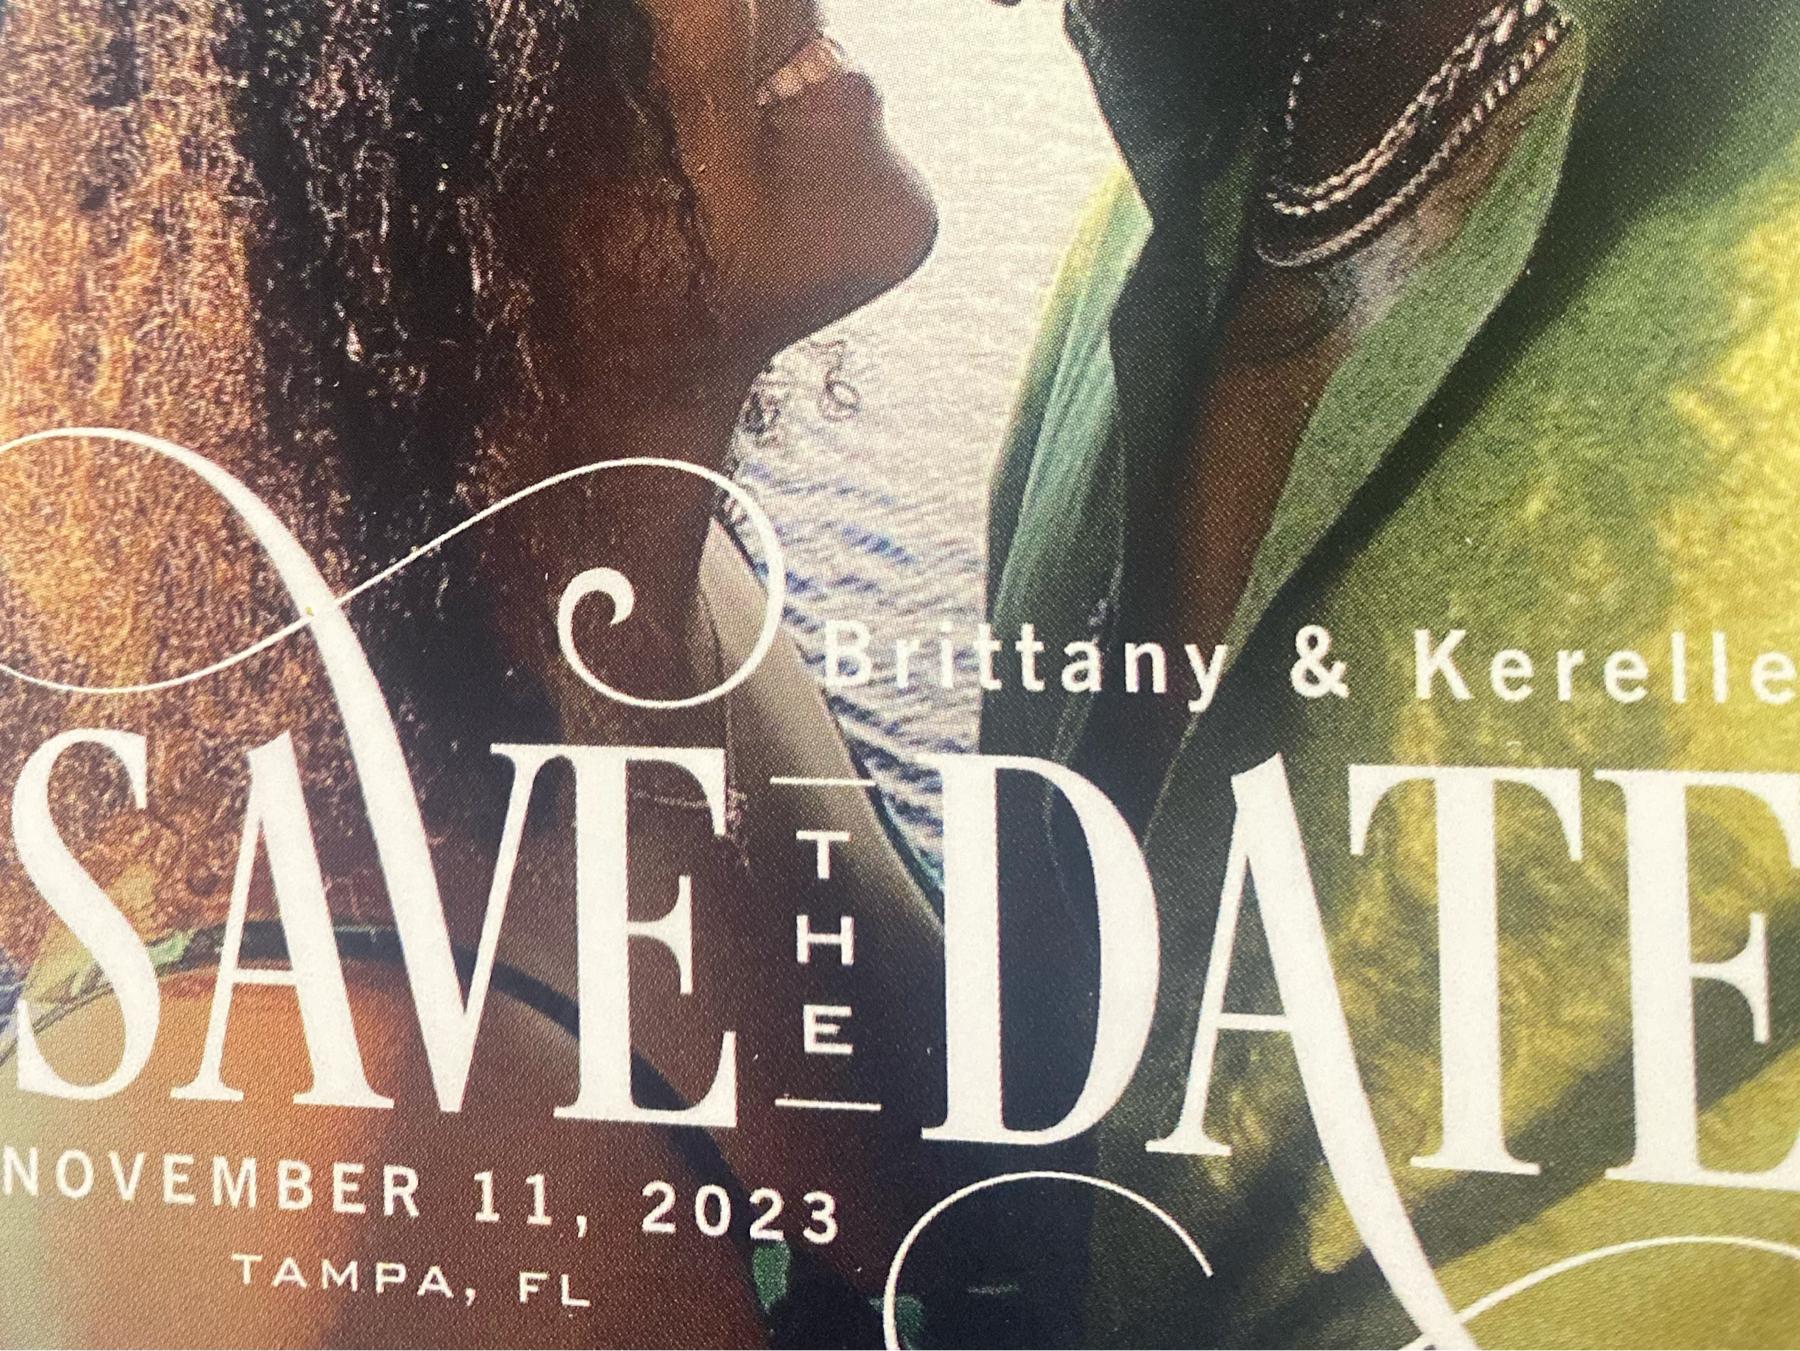 The Wedding Website of Brittany Thomas and Kerelle Bogle